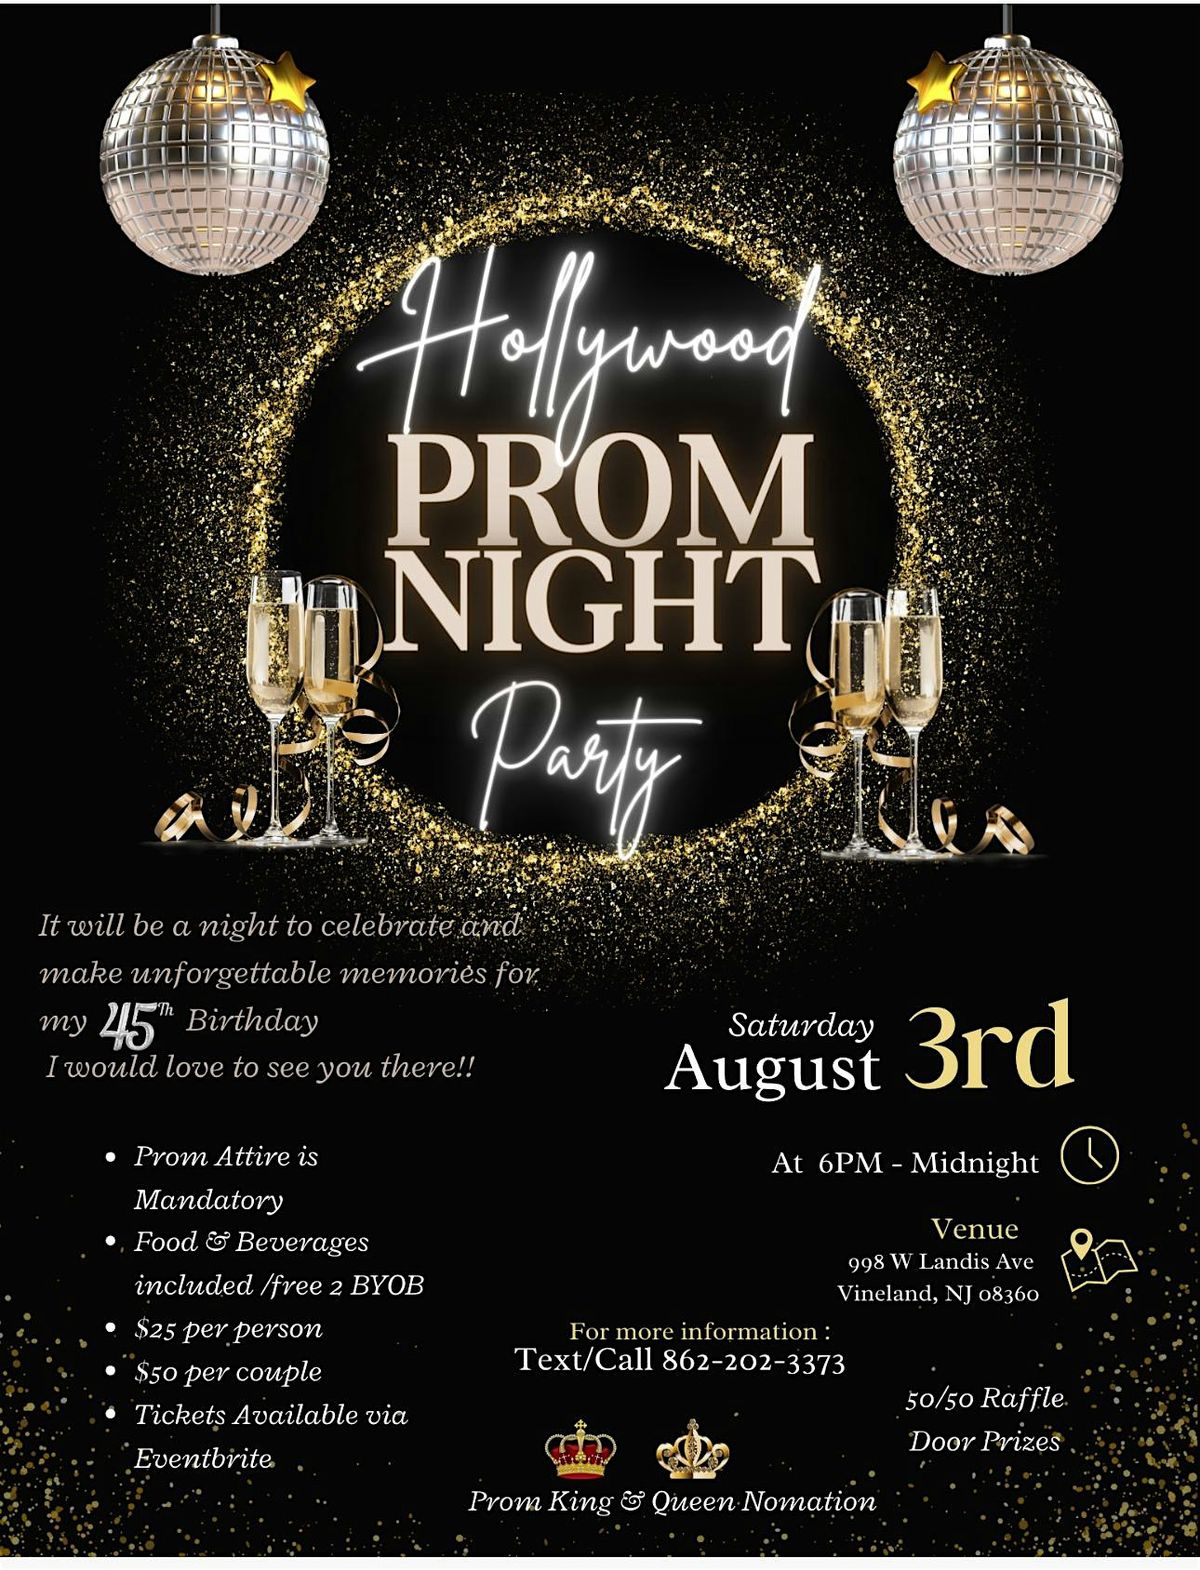 Hollywood Prom Night Party